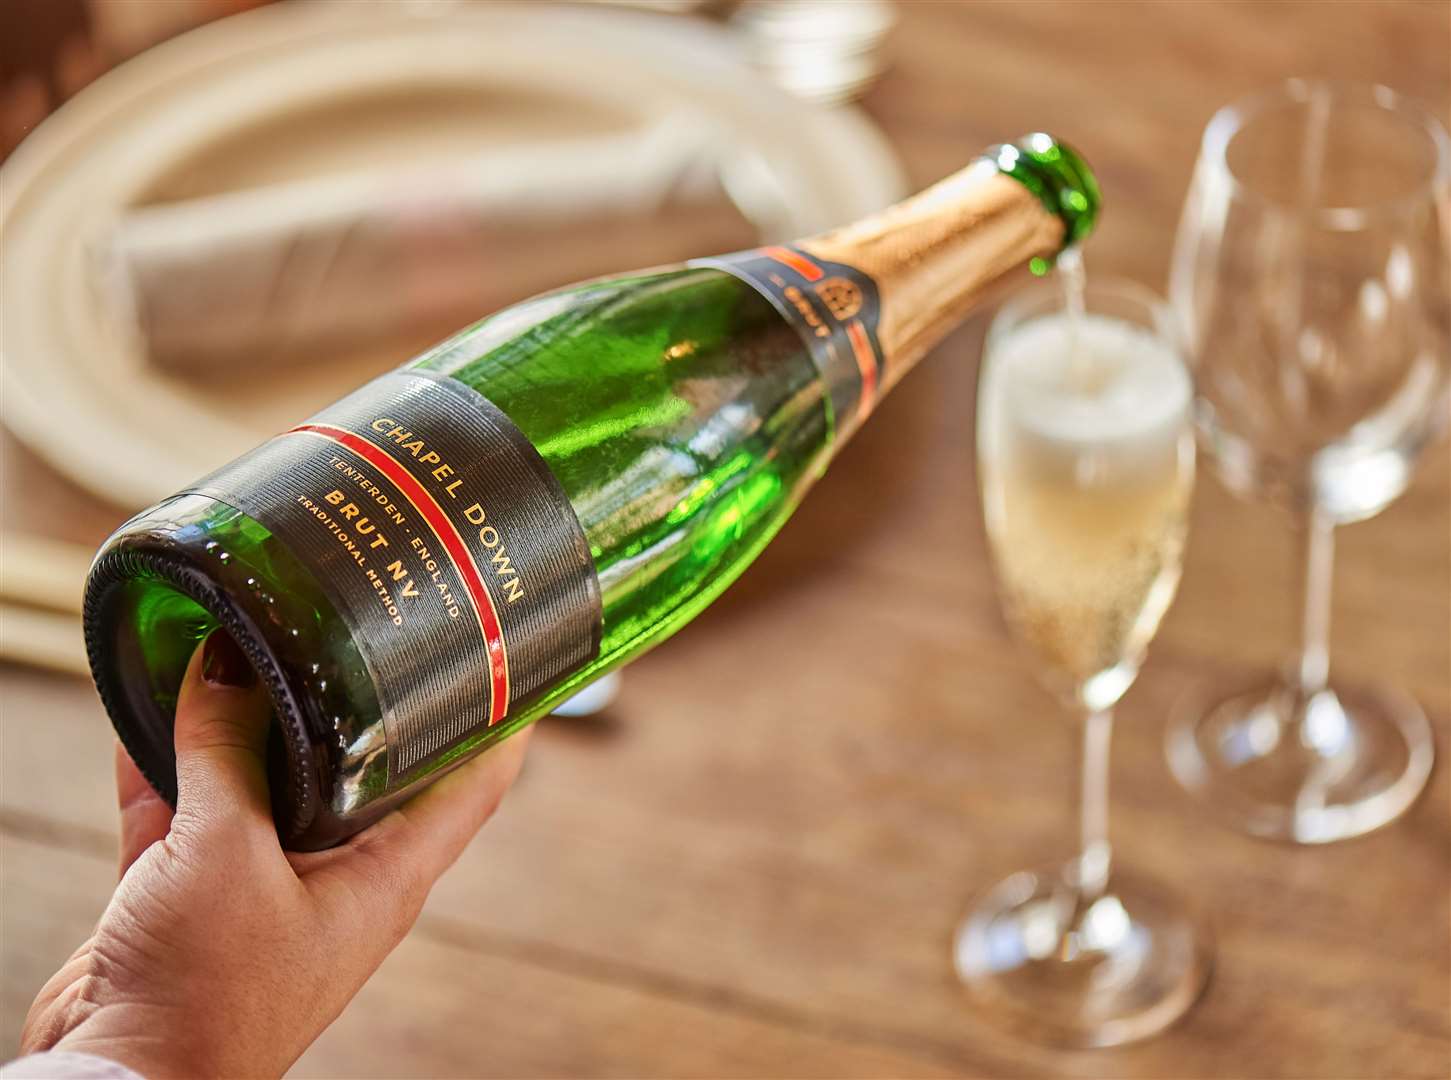 Chapel Down Brut and Rosé Brut are made in the traditional Champagne method